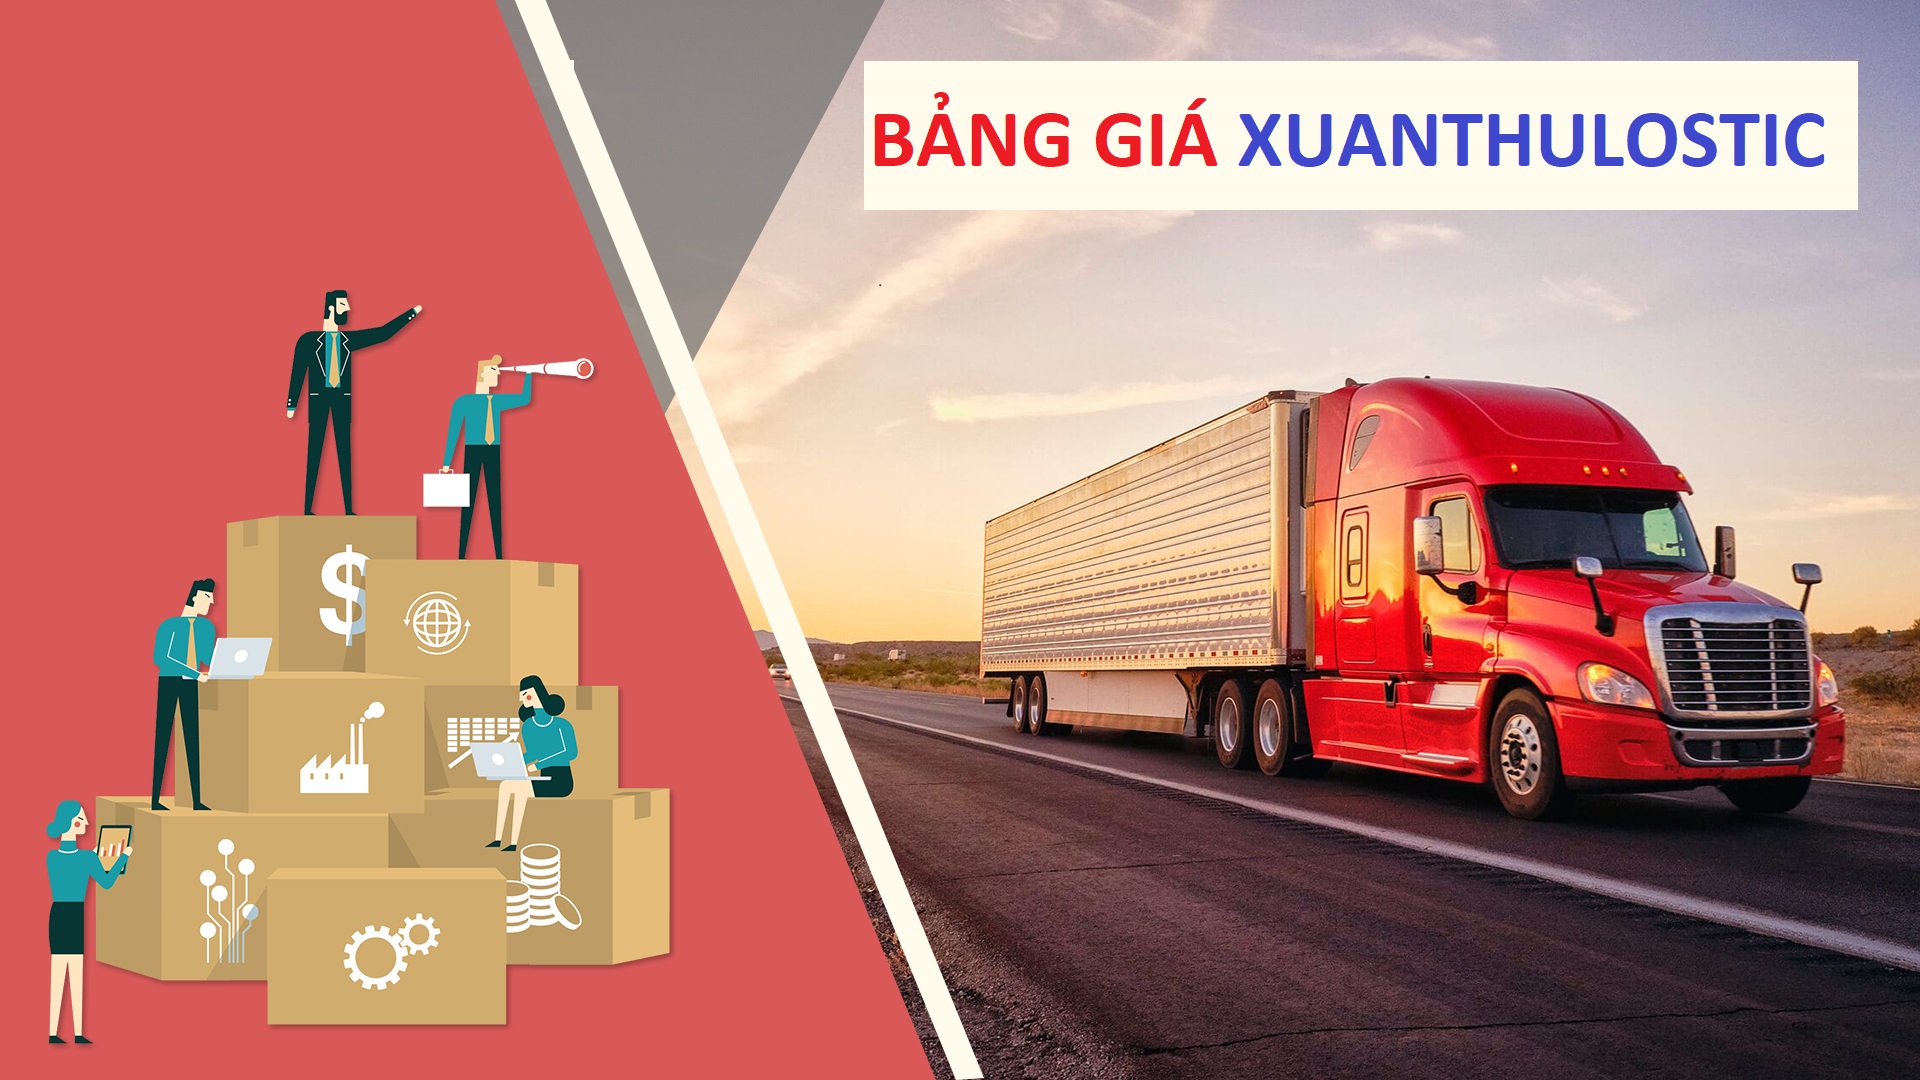 BẢNG GIÁ XUANTHULOGISTIC